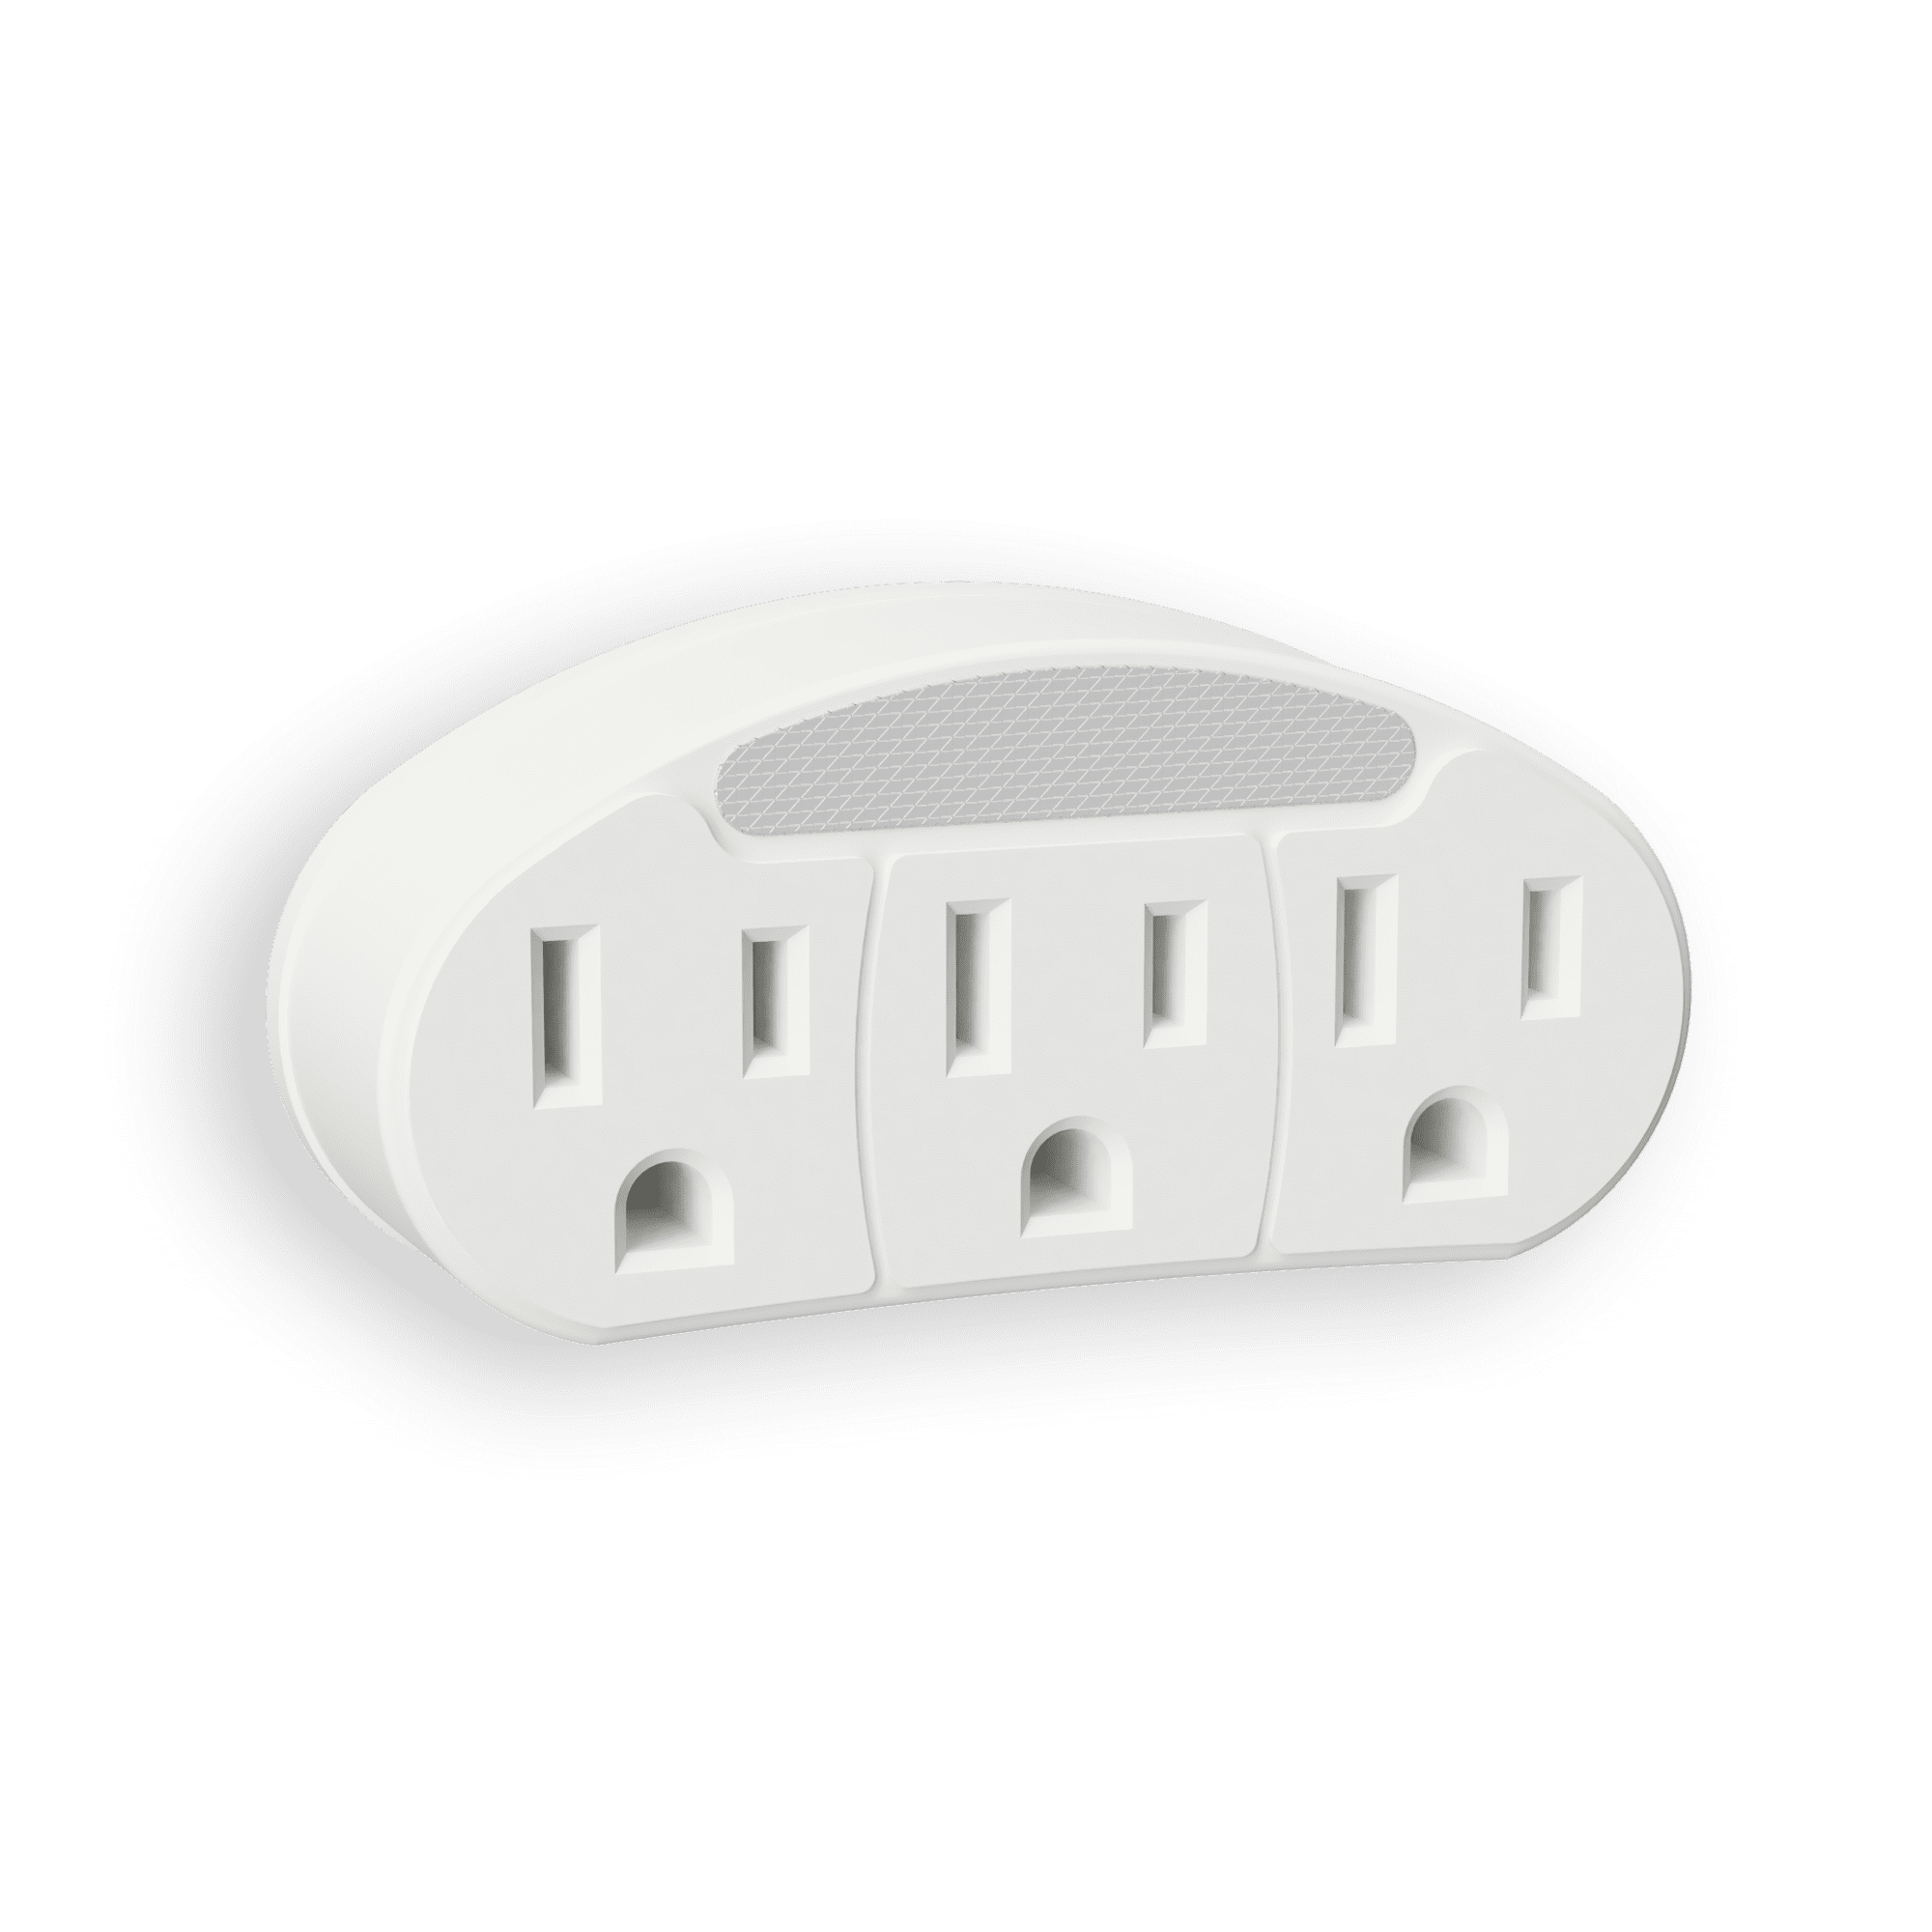 3493517 Automatic Plug-in Incandescent Night Light With Outlet